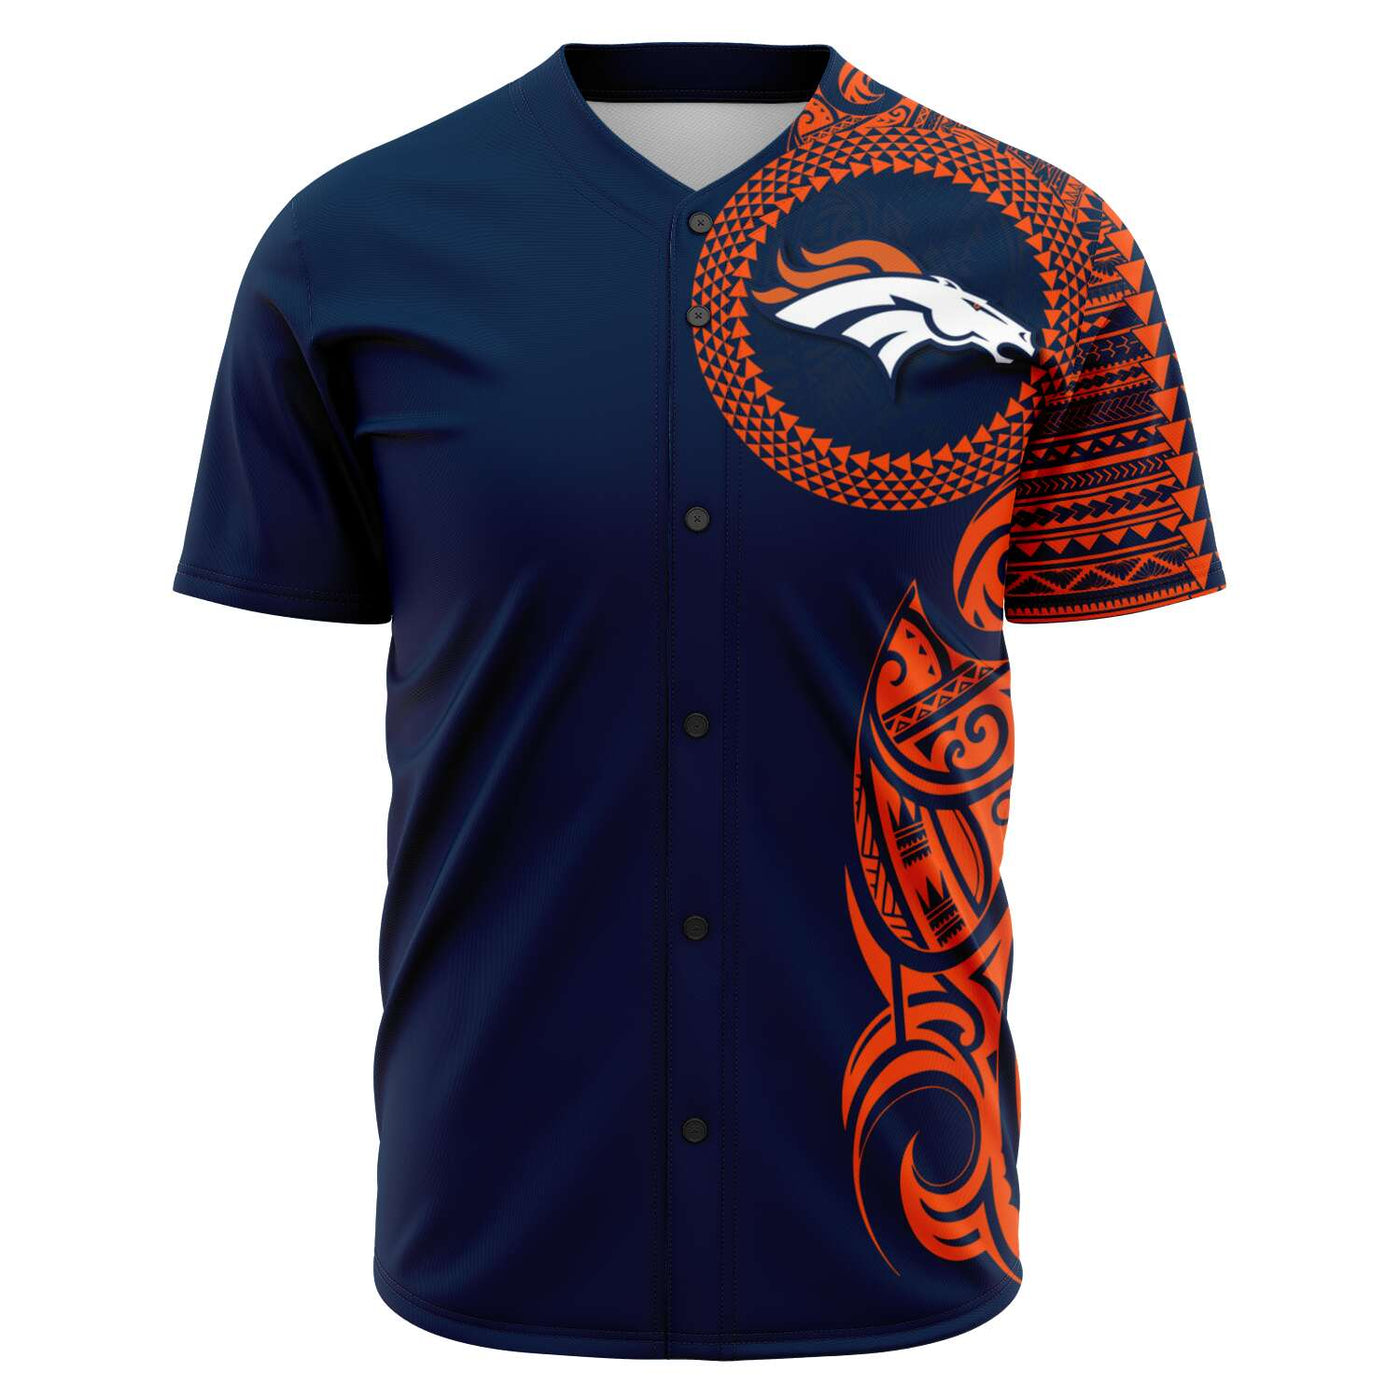 real broncos jersey